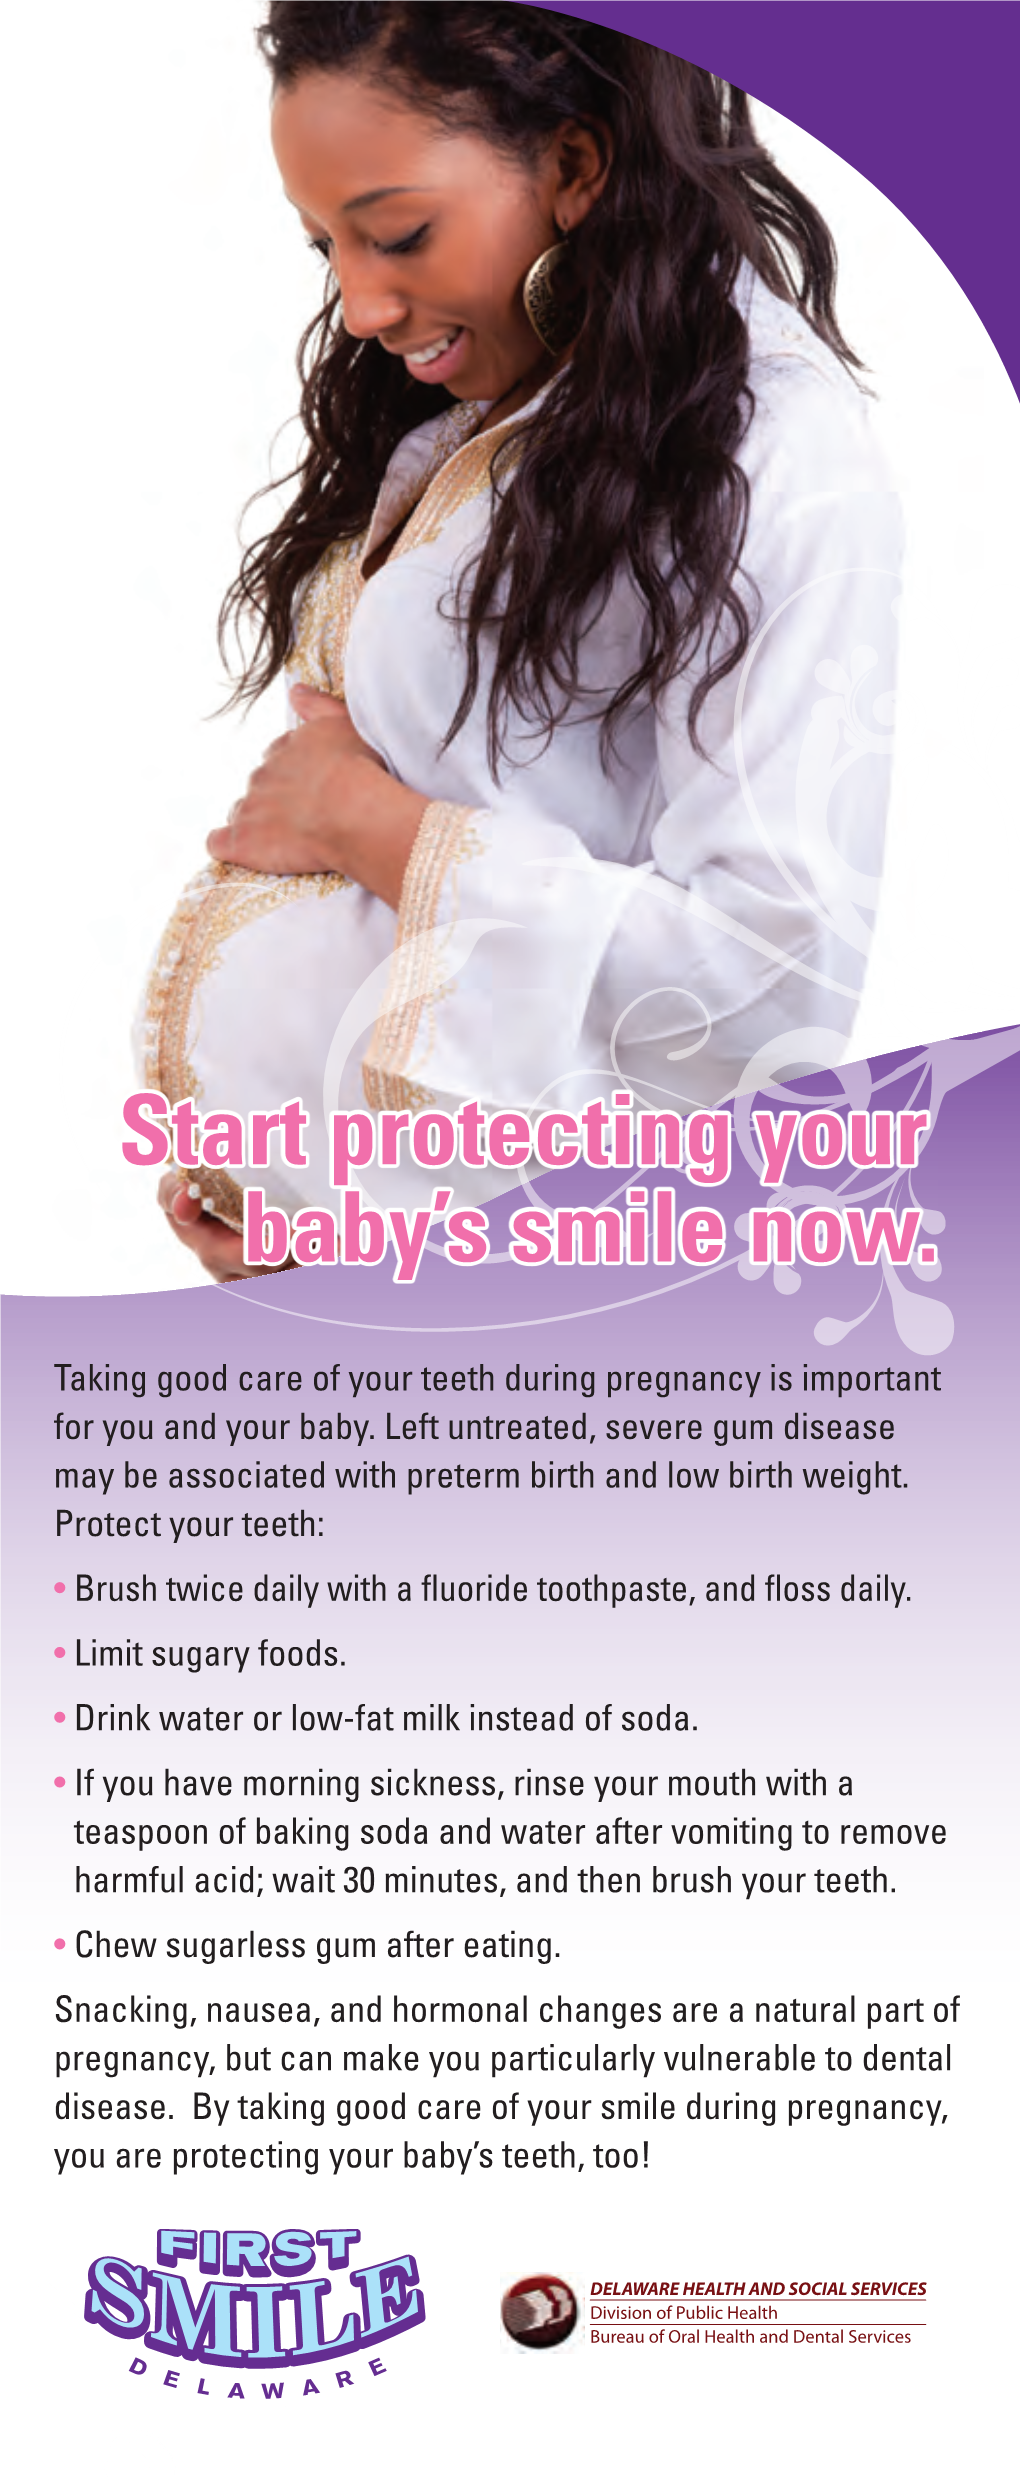 Start Protecting Your Baby's Smile Now